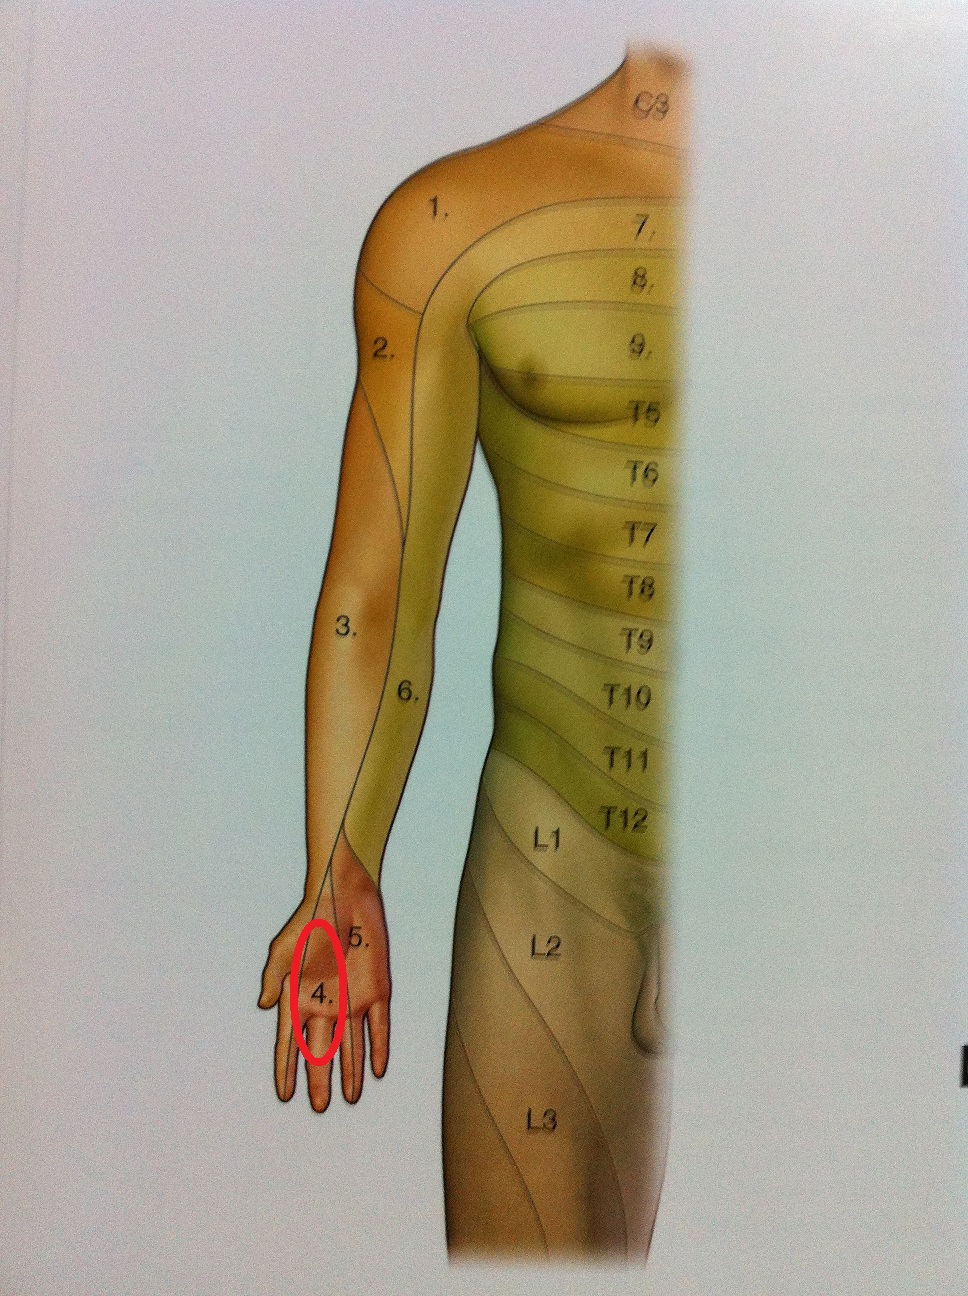 Dermatomes Of The Upper Extremity